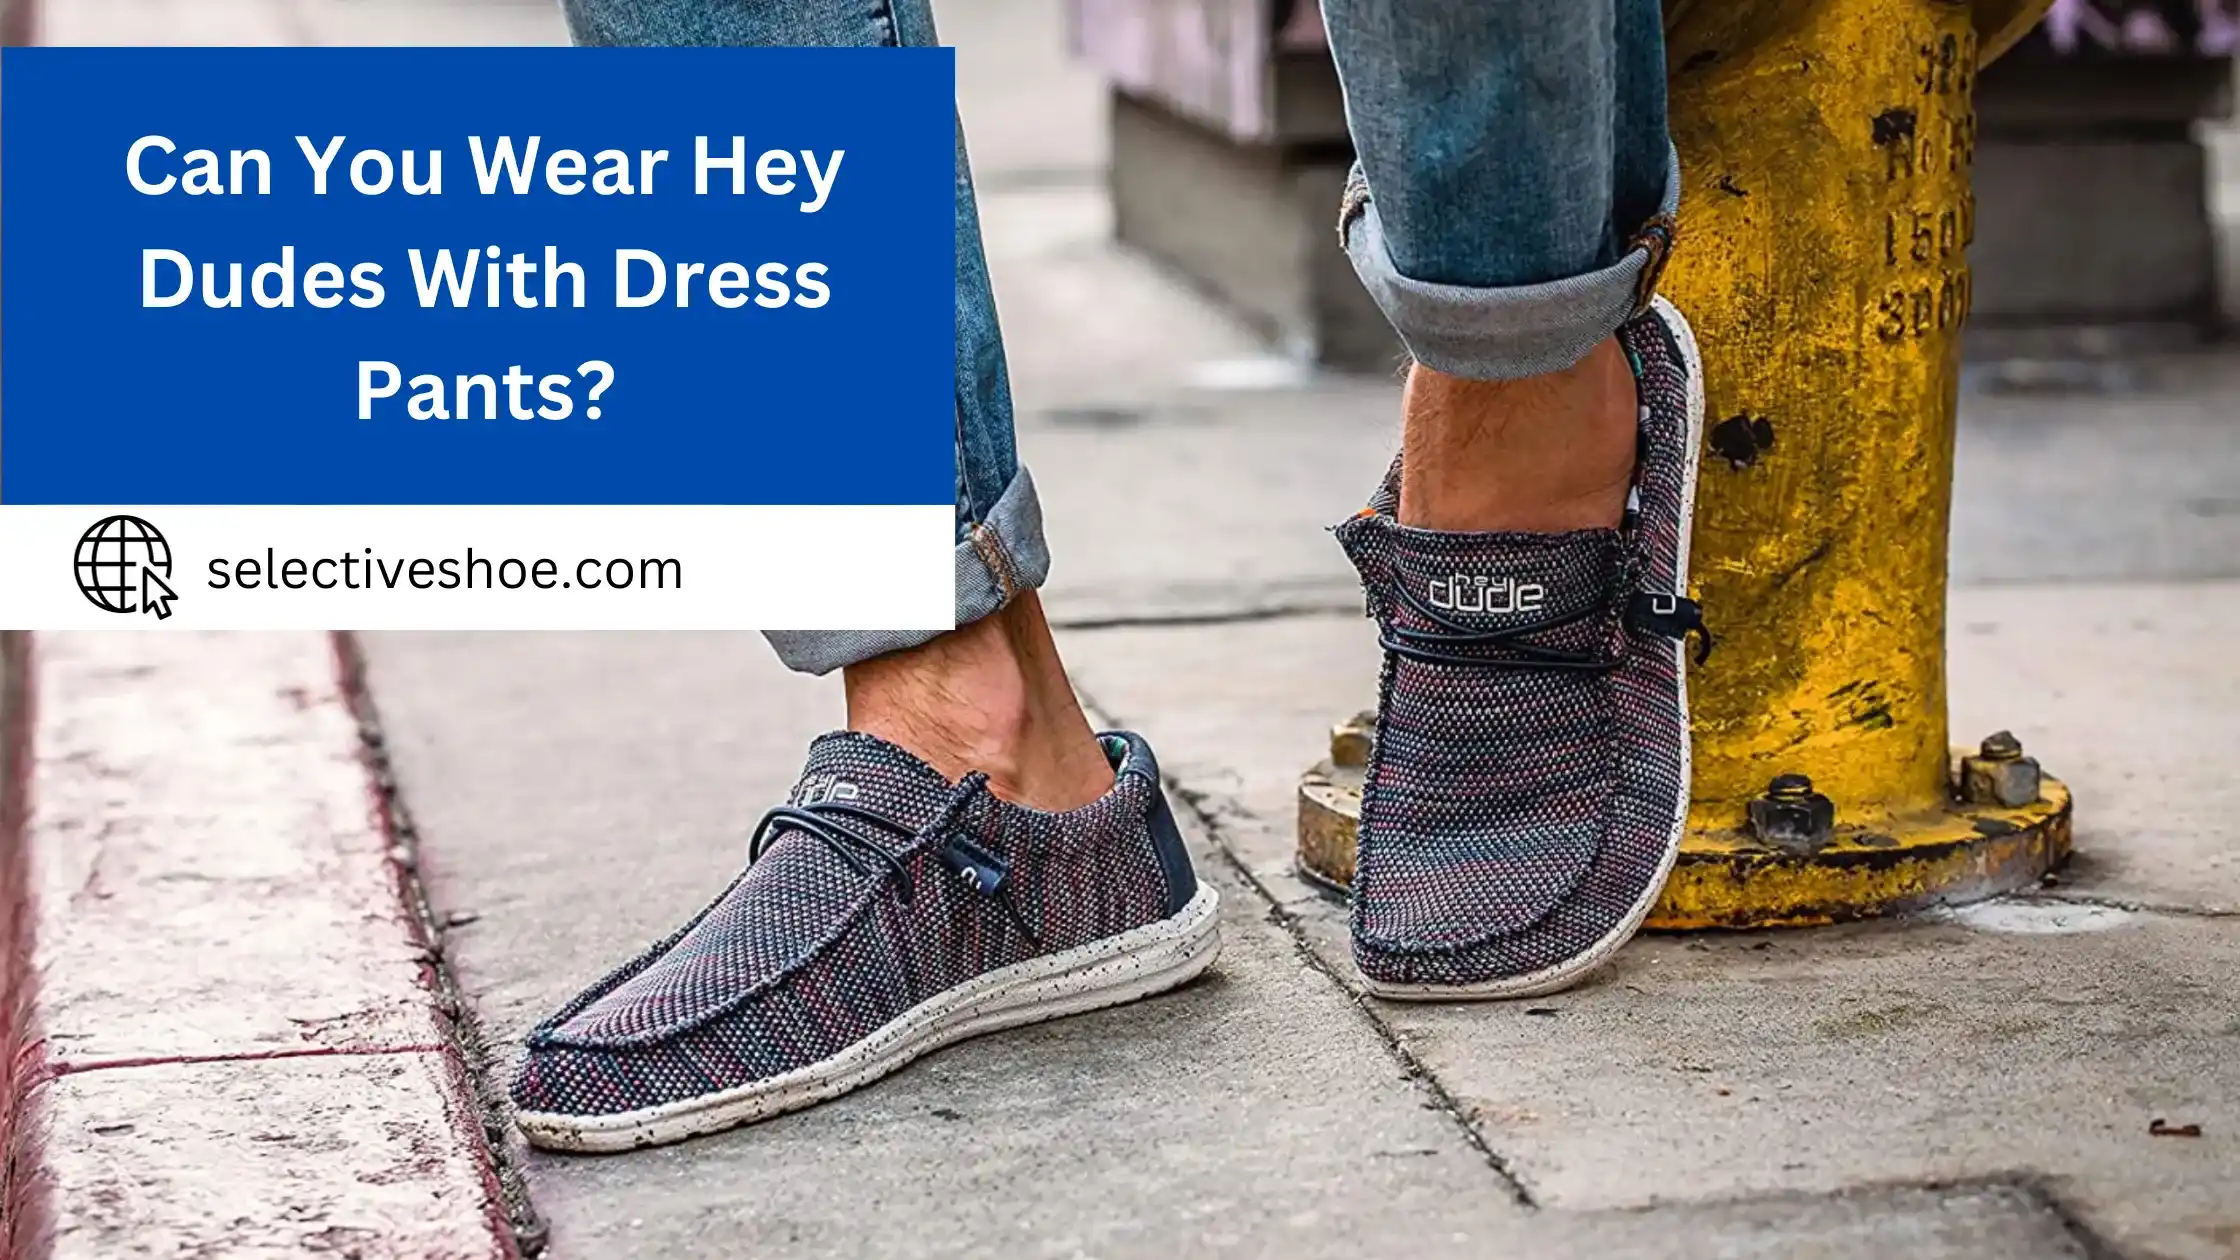 Can You Wear Hey Dudes With Dress Pants? Tips & Tricks